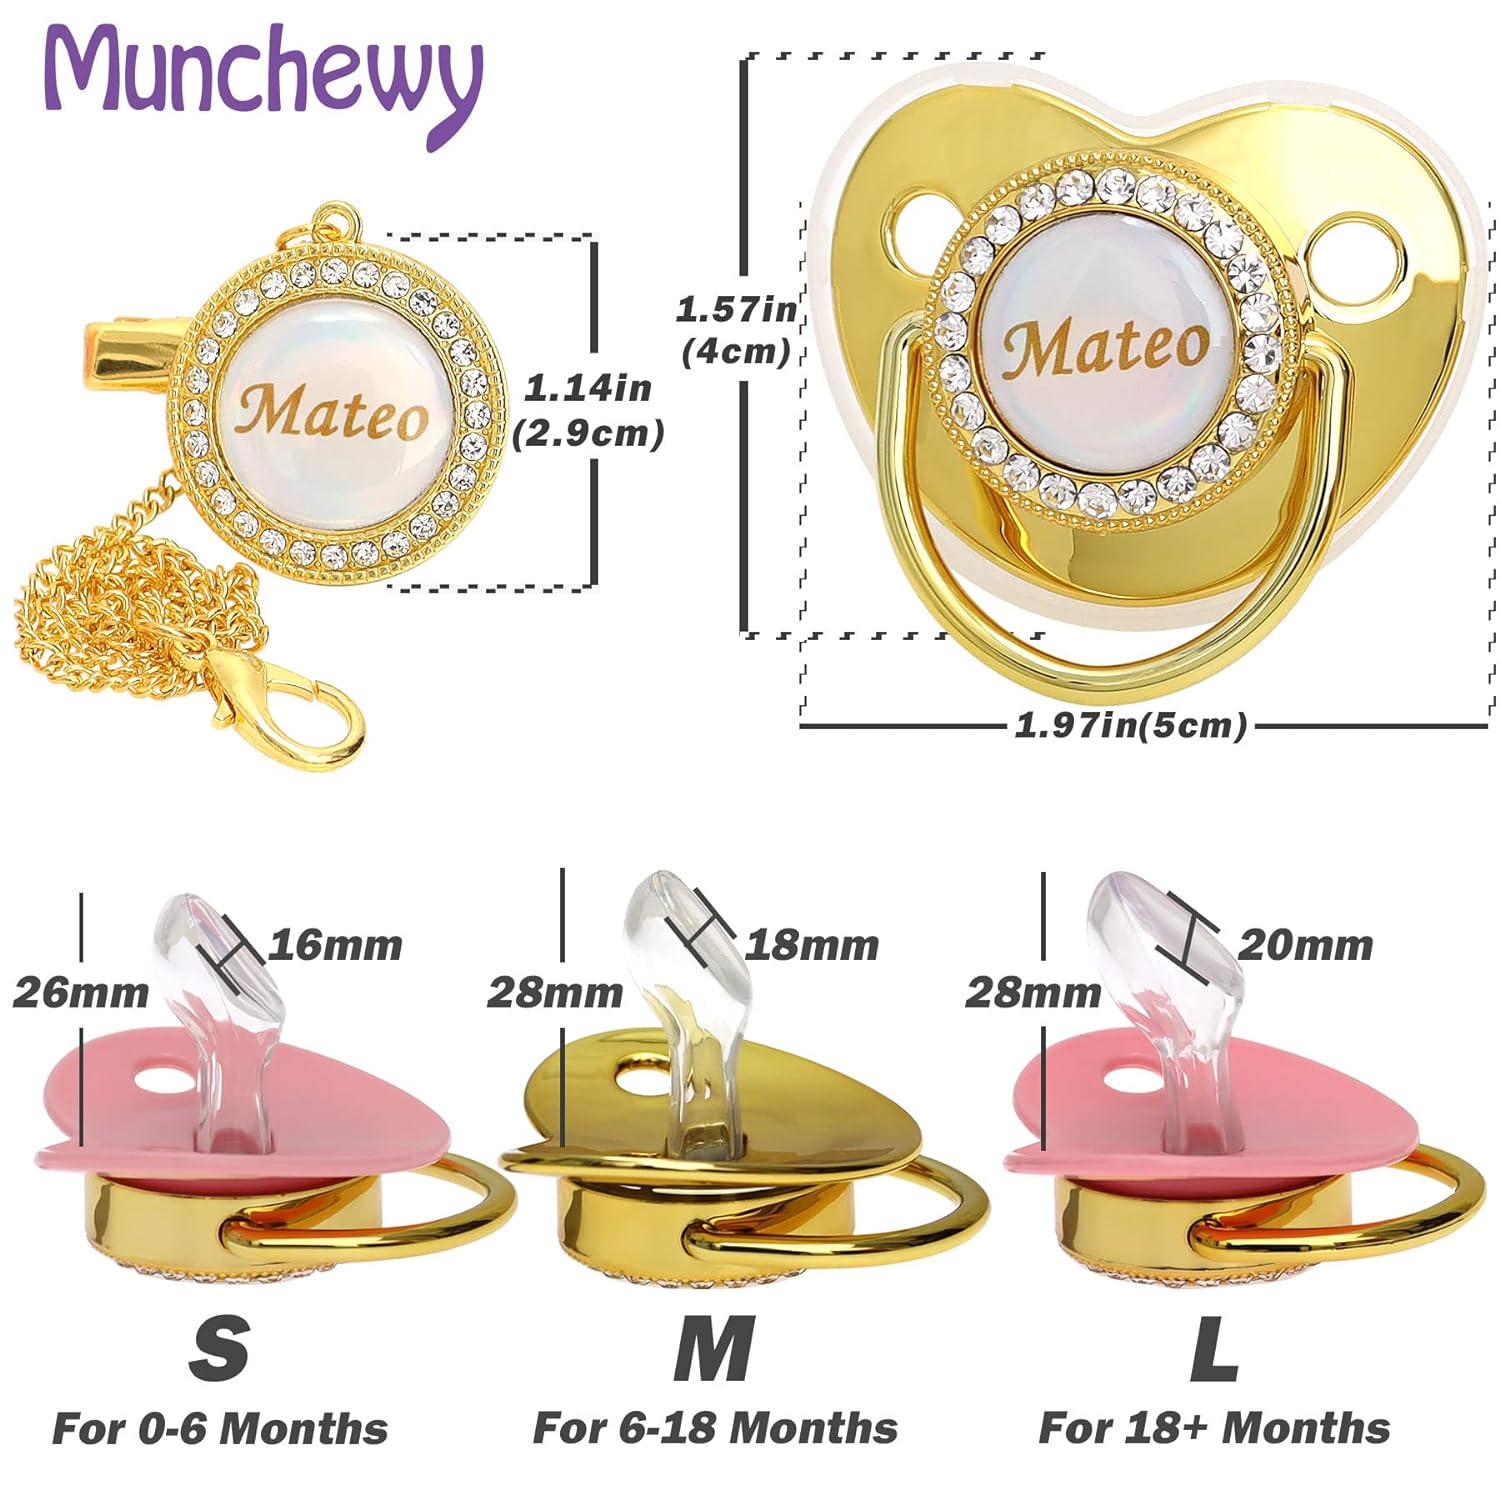 Personalized Pacifier and Pacifier Clip with Name, Bling Gold Pacifier Clip Set with Gift Box Greeting Card, Glitter Crystal Luxurious Dummy Ideal Gift for Girl Baby Shower Newborn Photography(Pink,L)